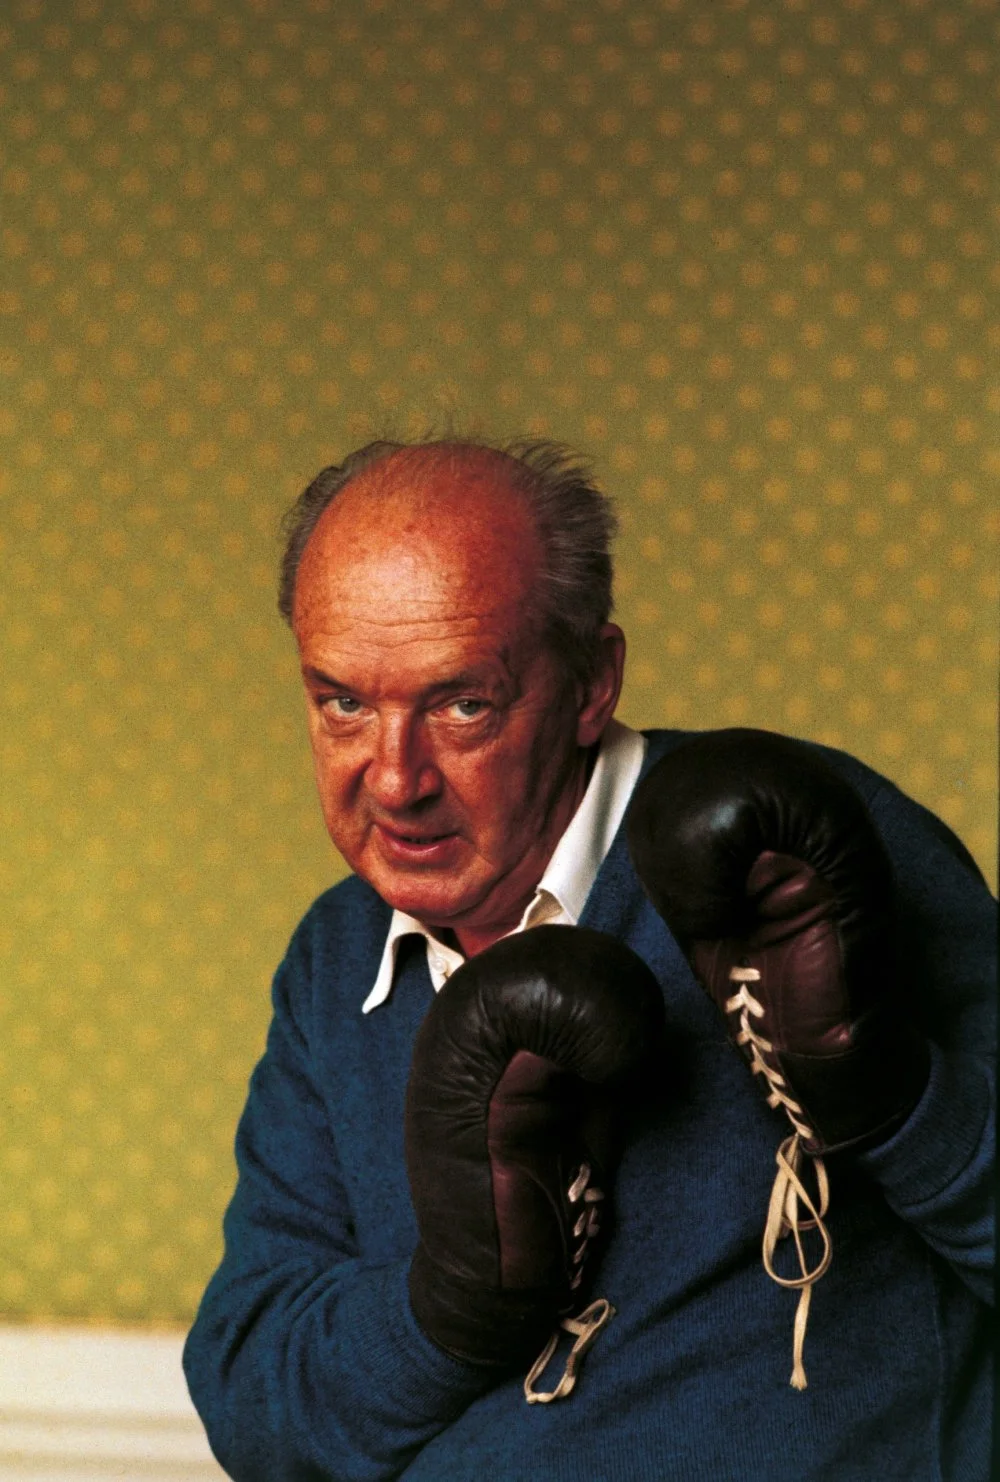 Vladimir Nabokov With Boxing Gloves/Getty images